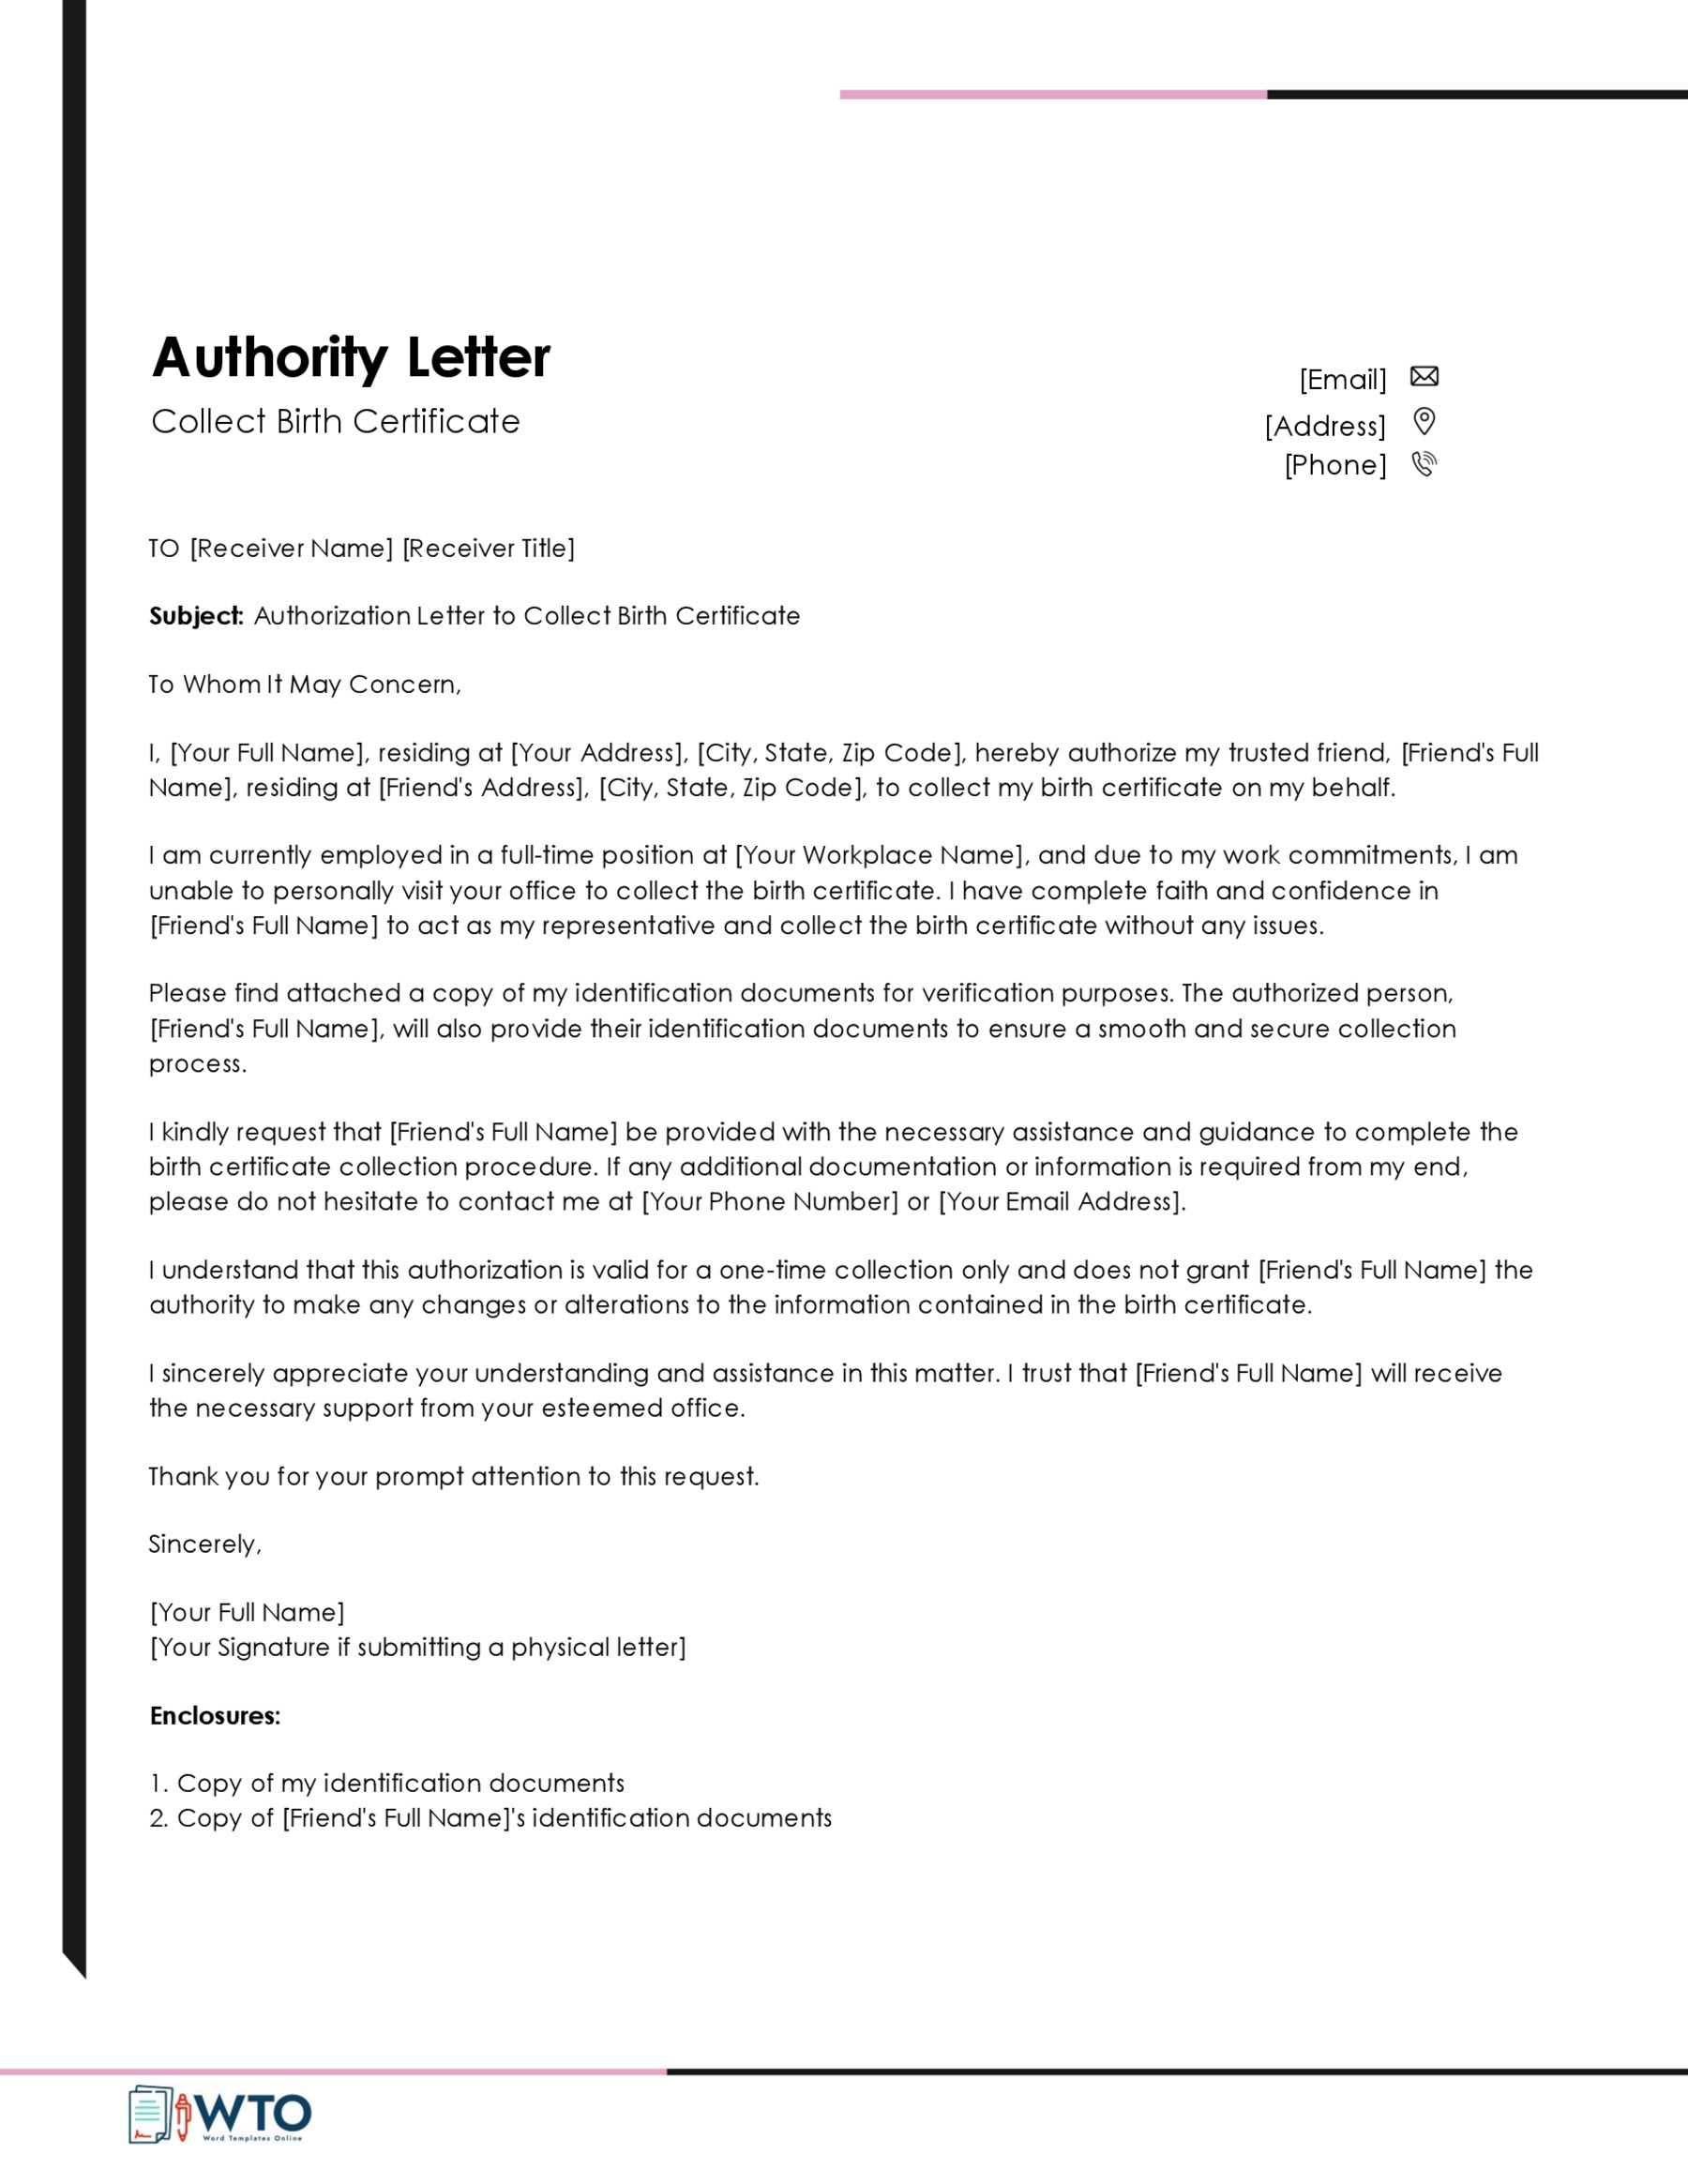 Authorization Letter for Claiming Birth Certificate Template-Free Downloadable